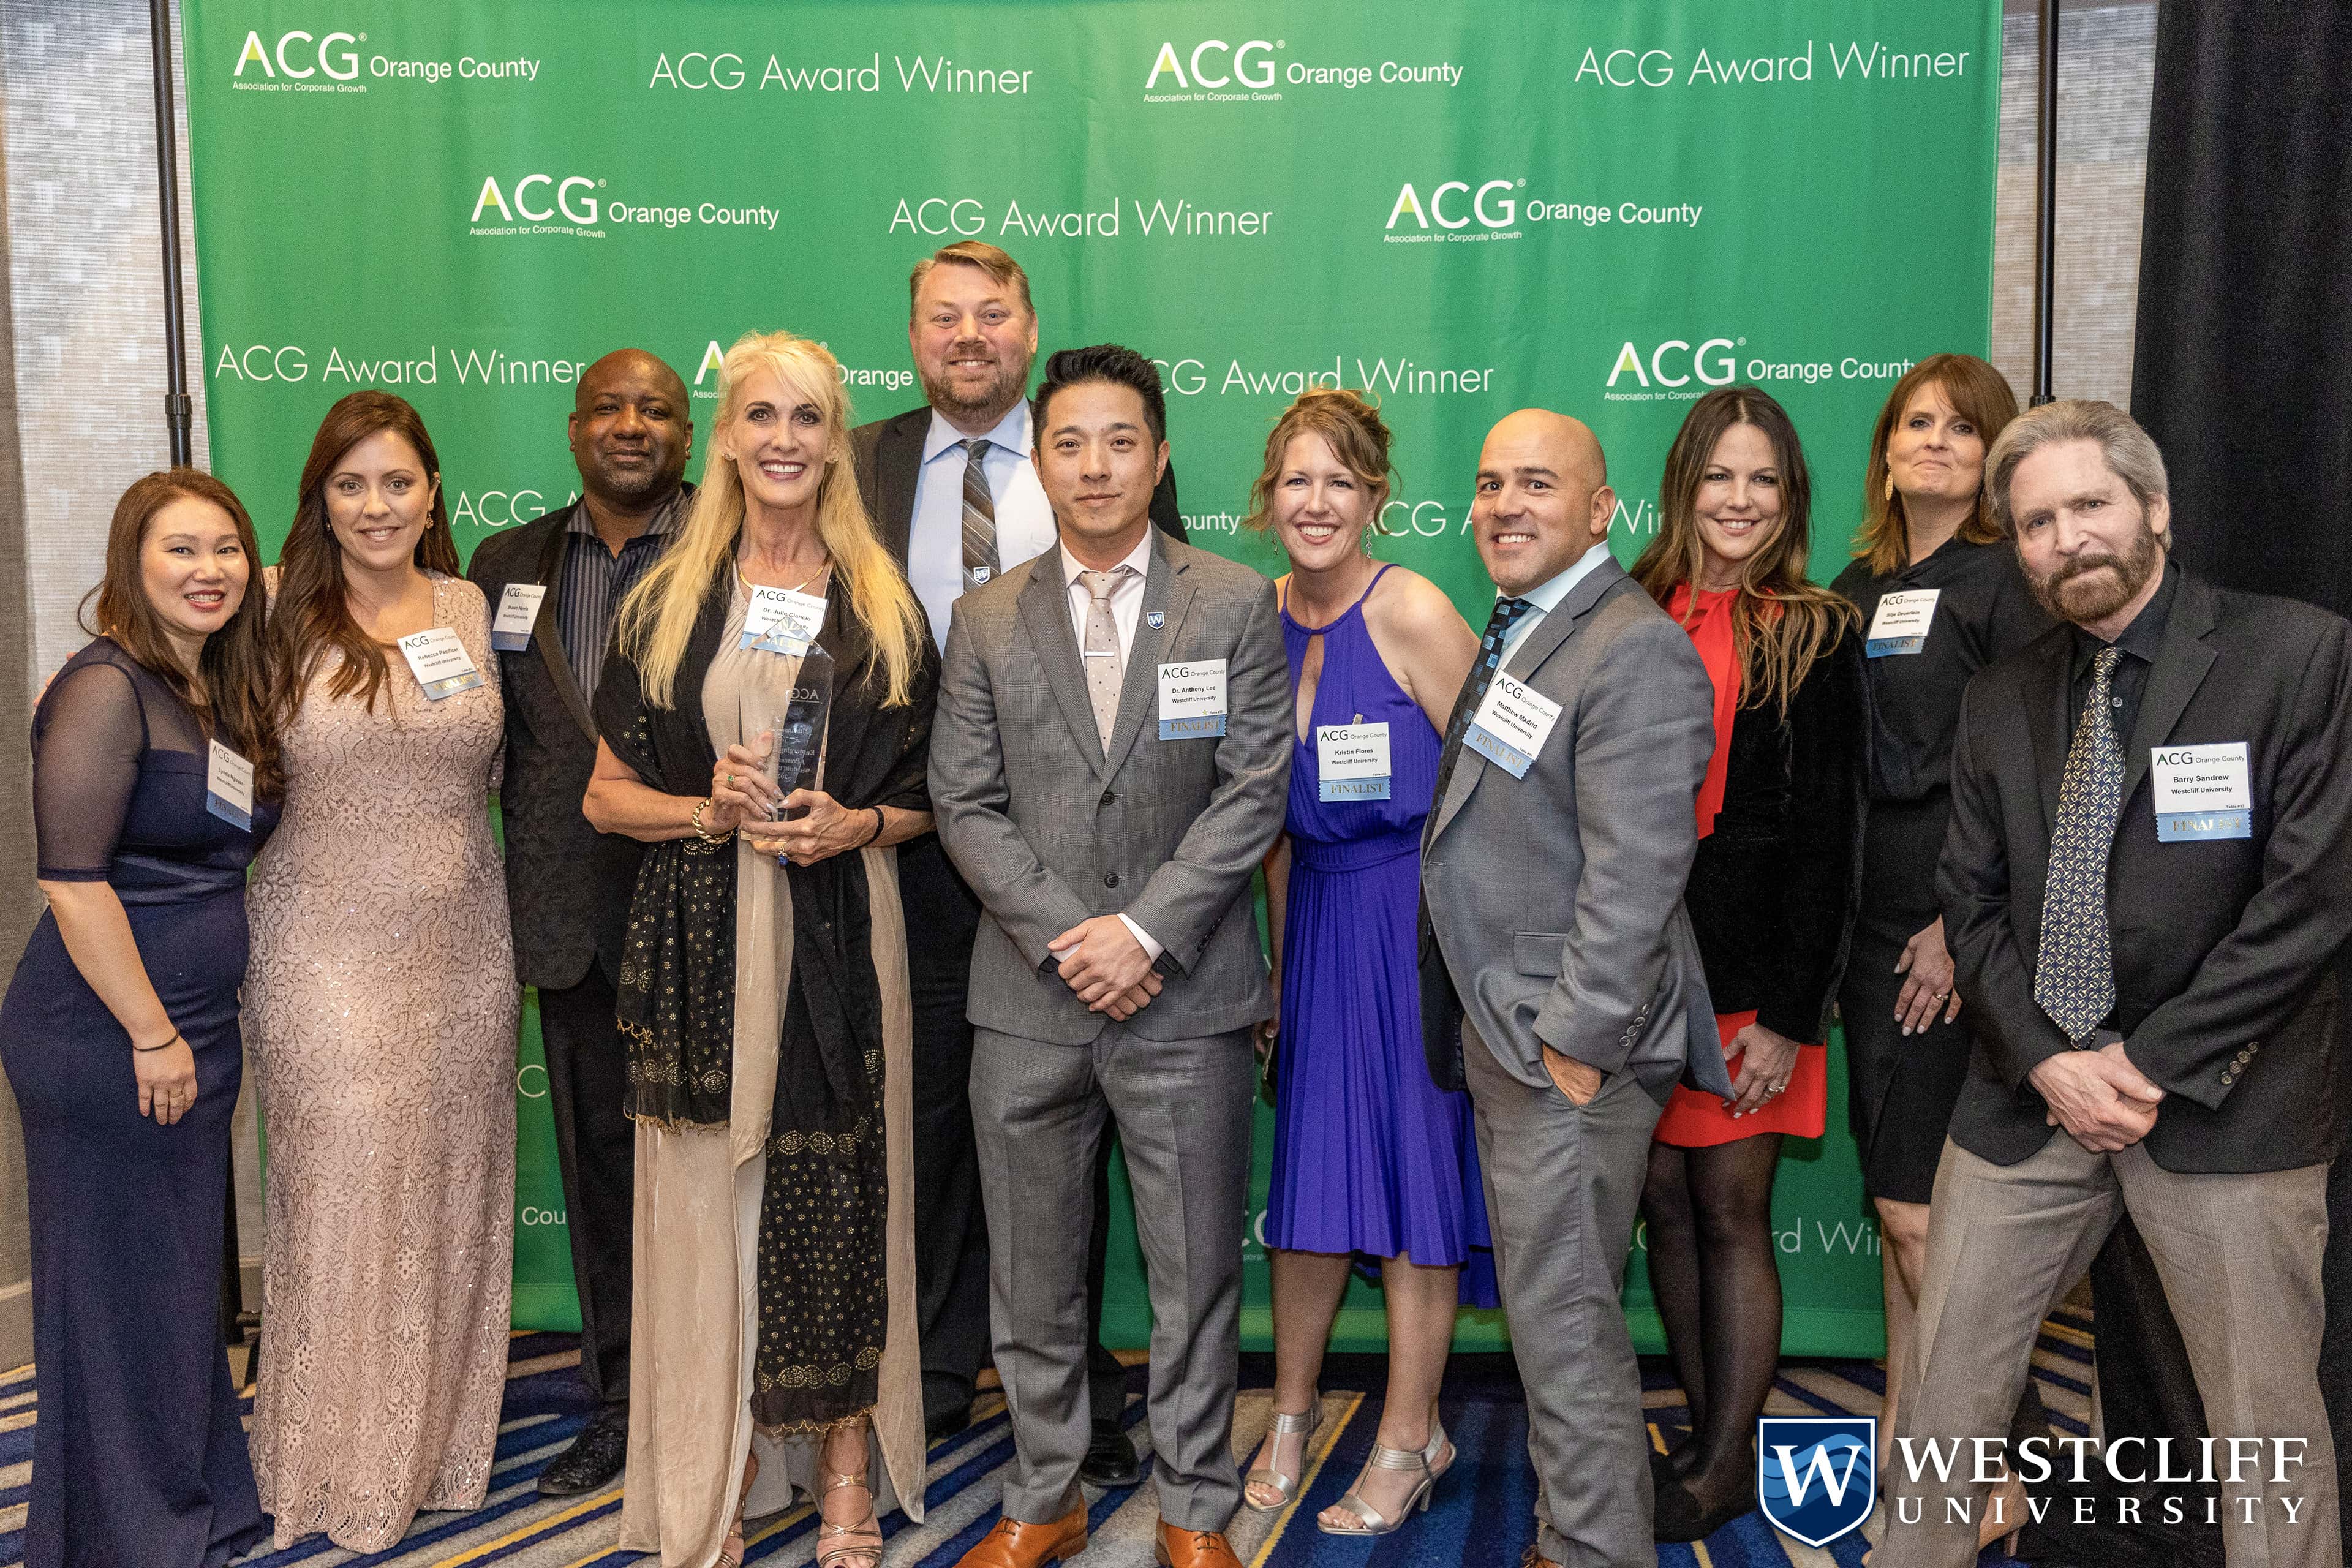 WESTCLIFF UNIVERSITY TAKES TOP HONORS AT 2022 ACG AWARDS